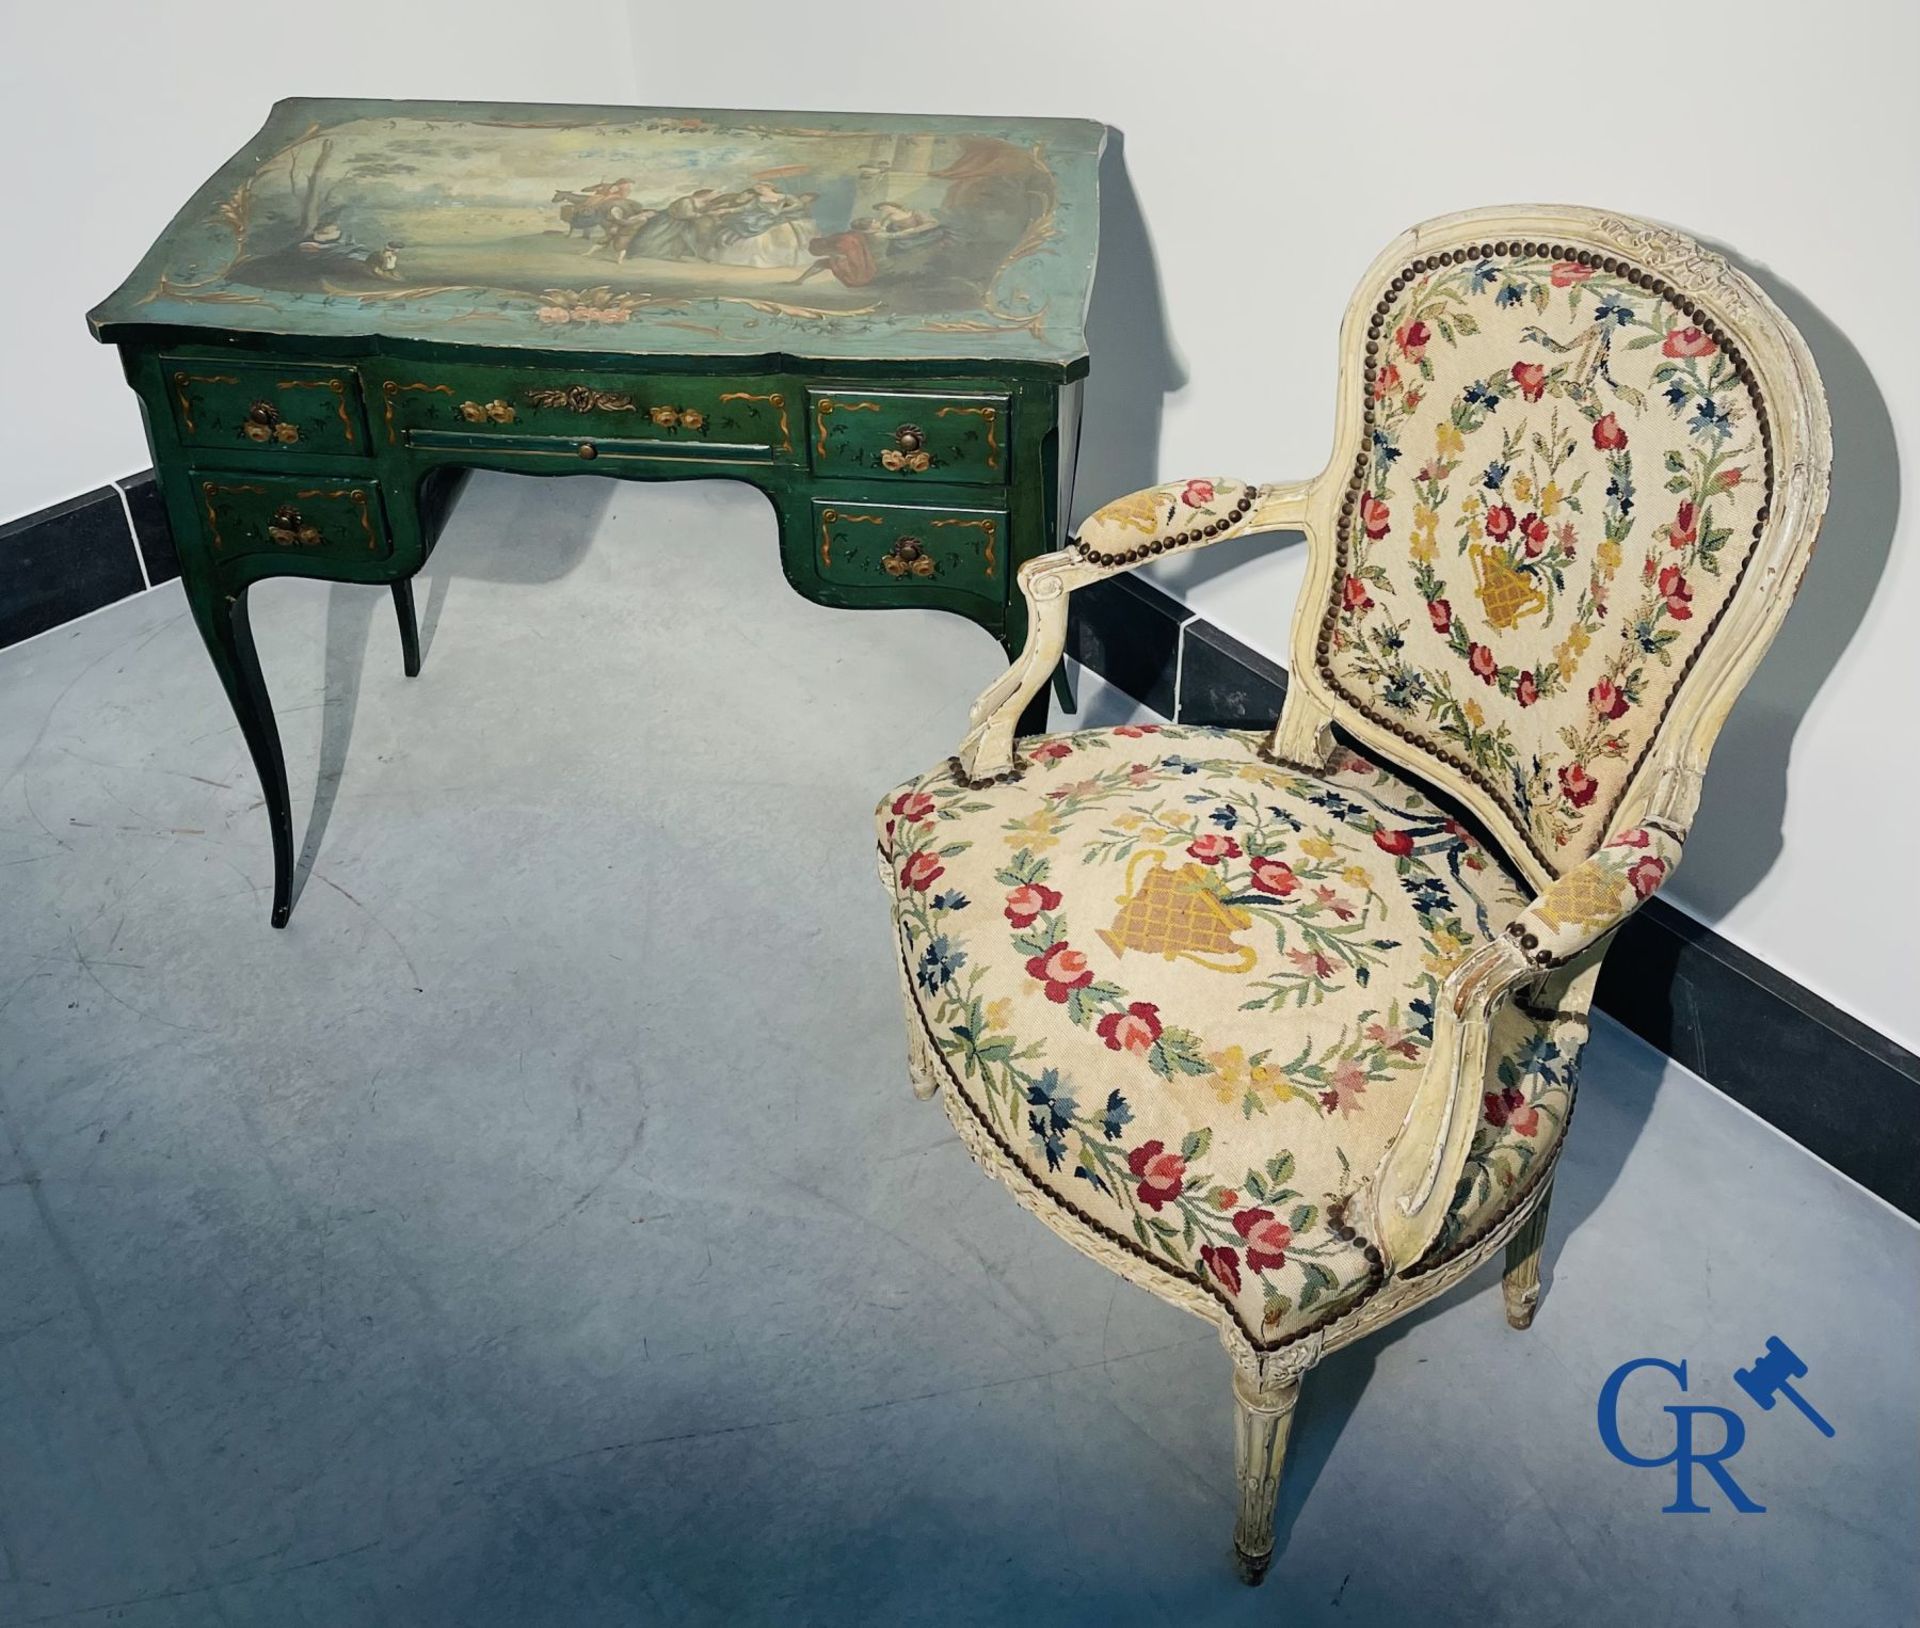 Ladies dressing table with gallant paintings, and a lacquered armchair transitional period Louis XV  - Image 8 of 17